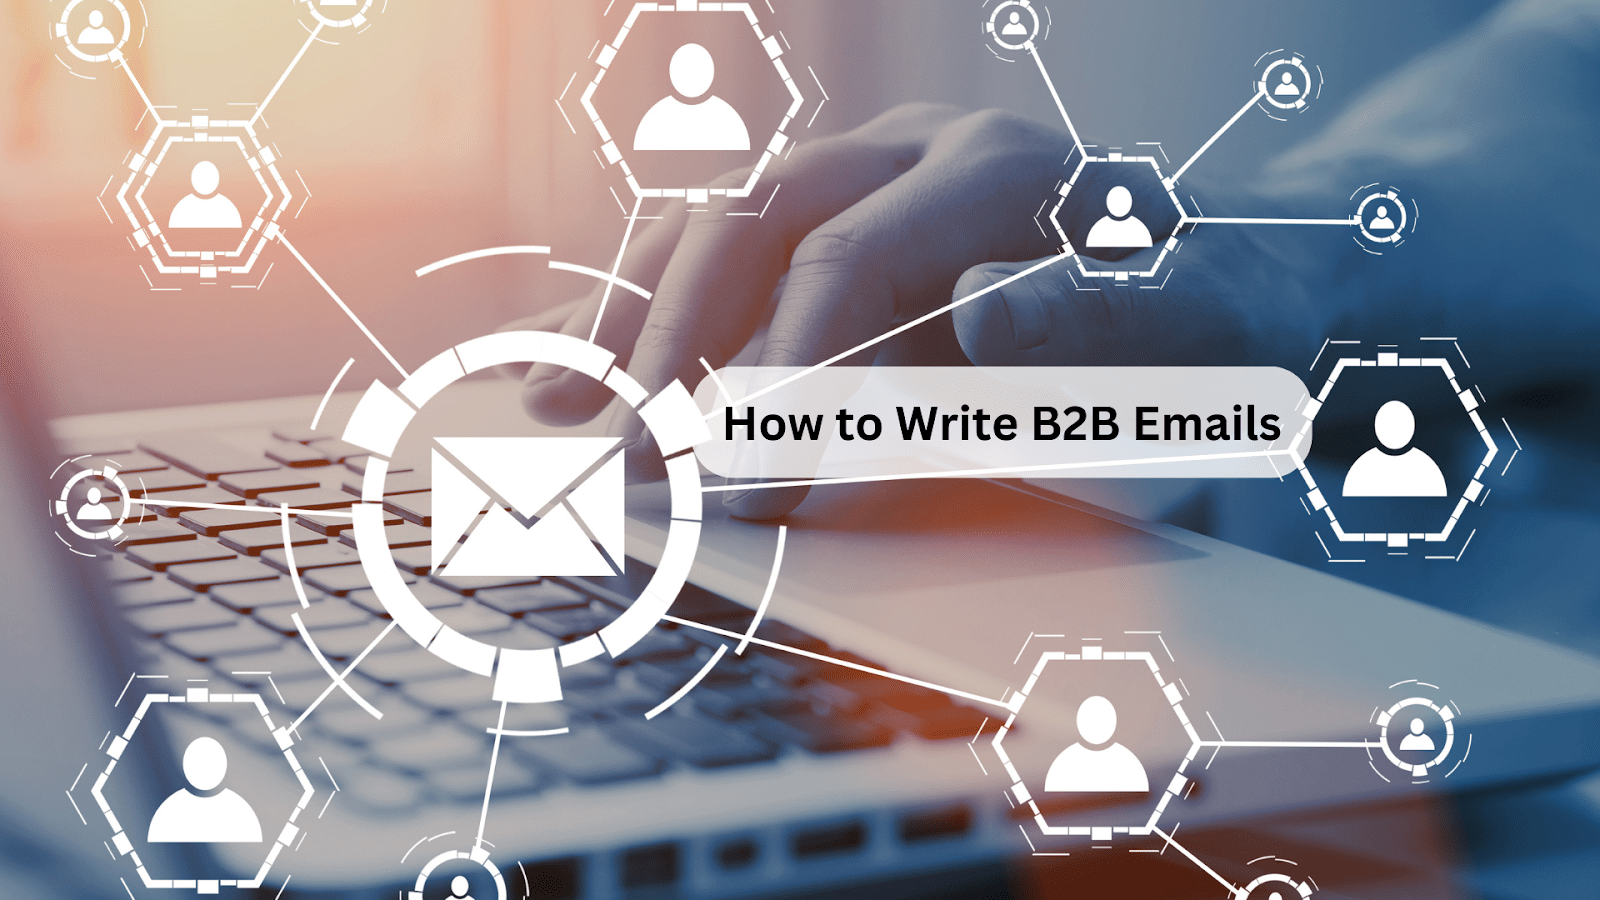 How to Write B2B Emails